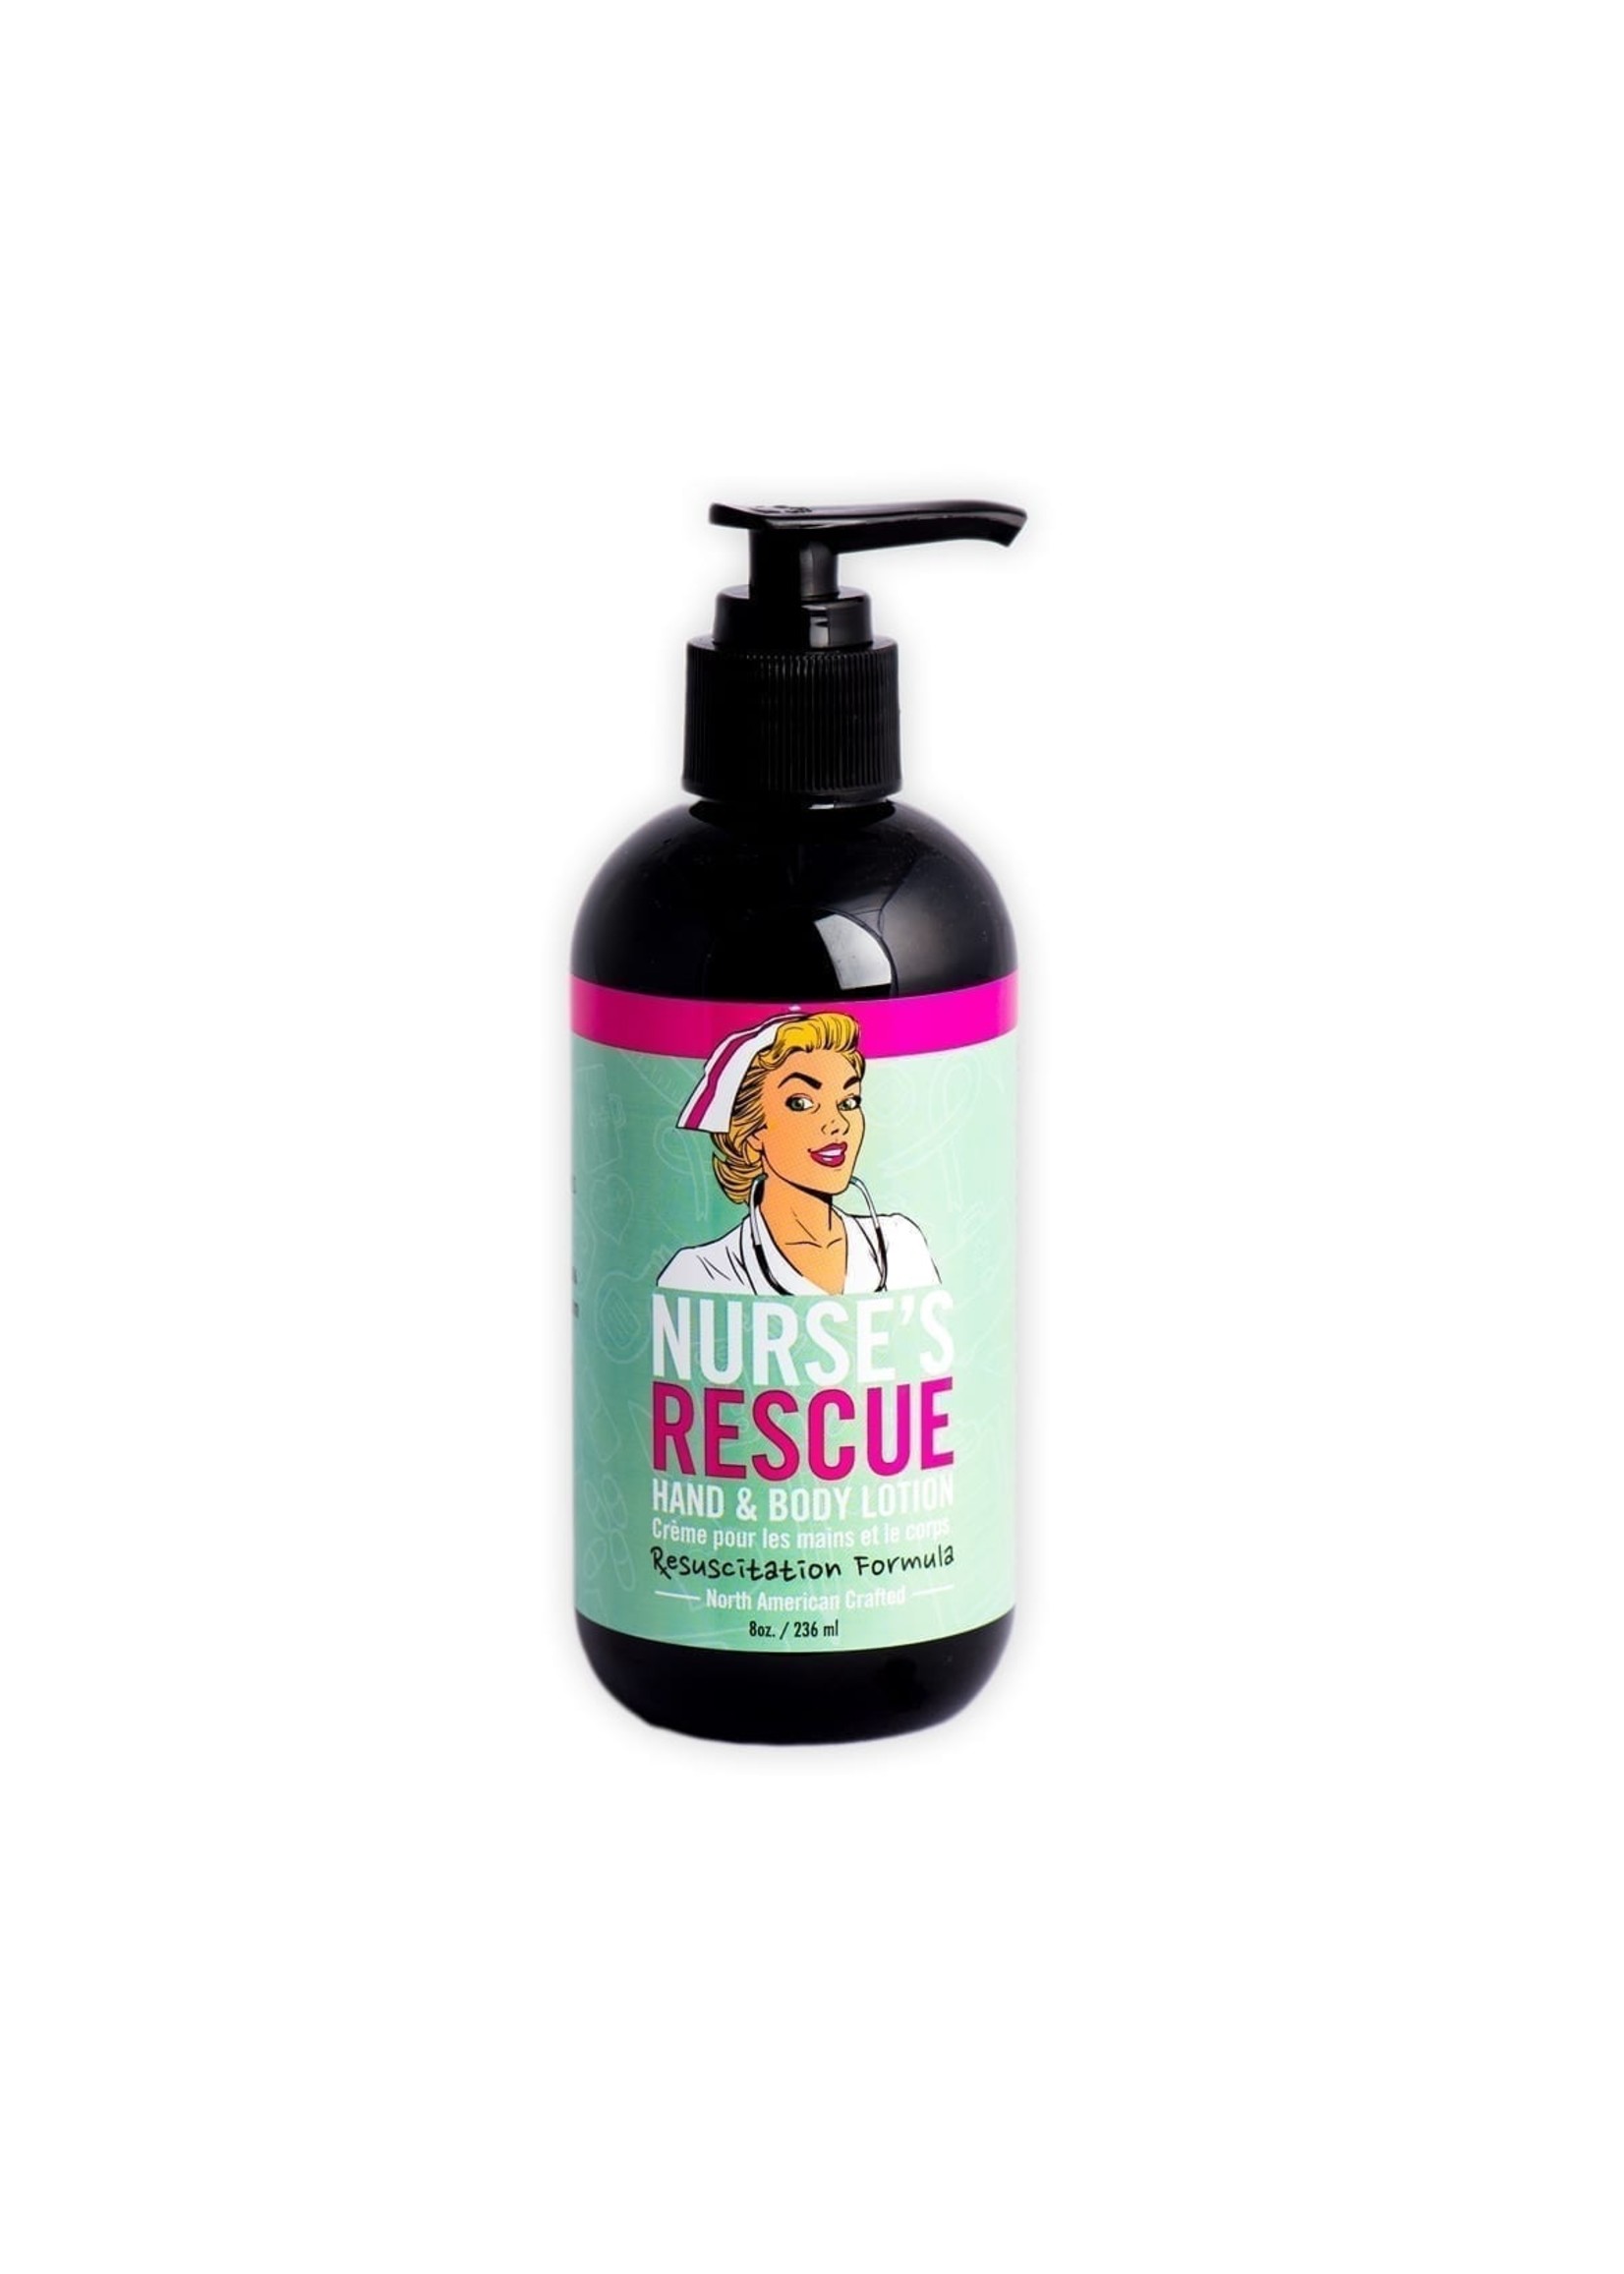 Nurse's Rescue Hand and Body Lotion 236ml